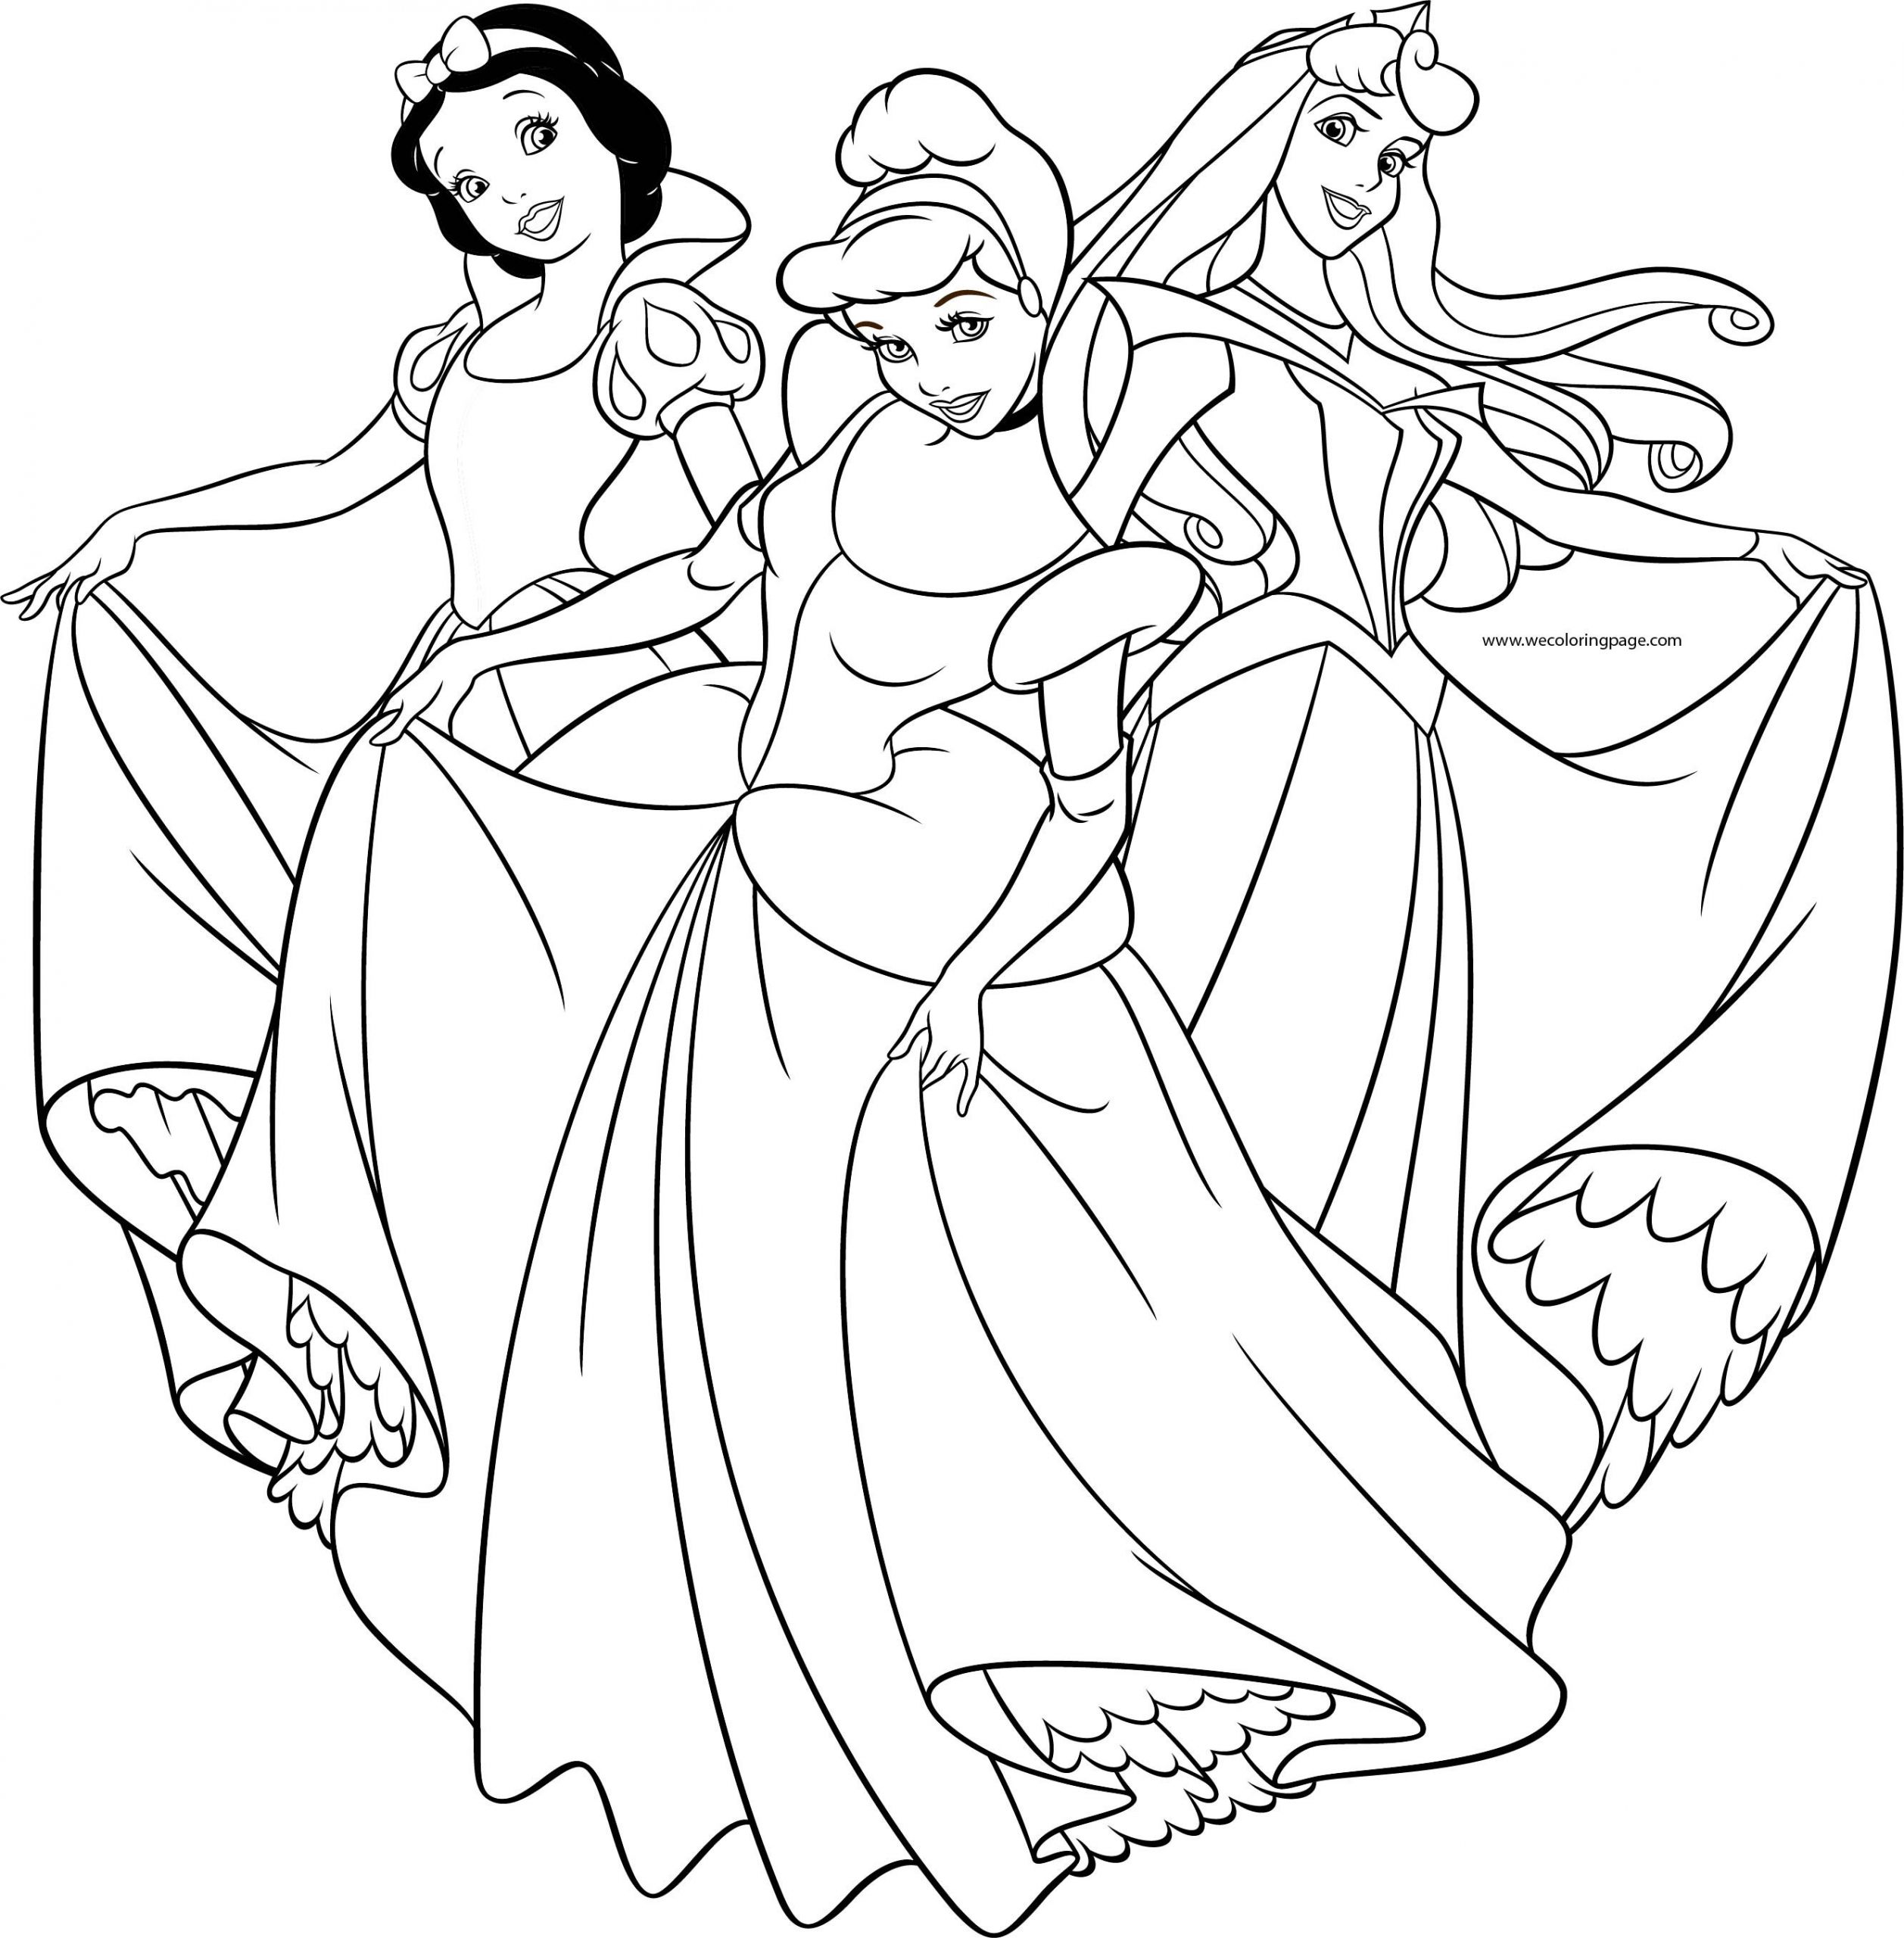 Princess Coloring Pages For Girls
 Disney Princess Girls Pose Coloring Page